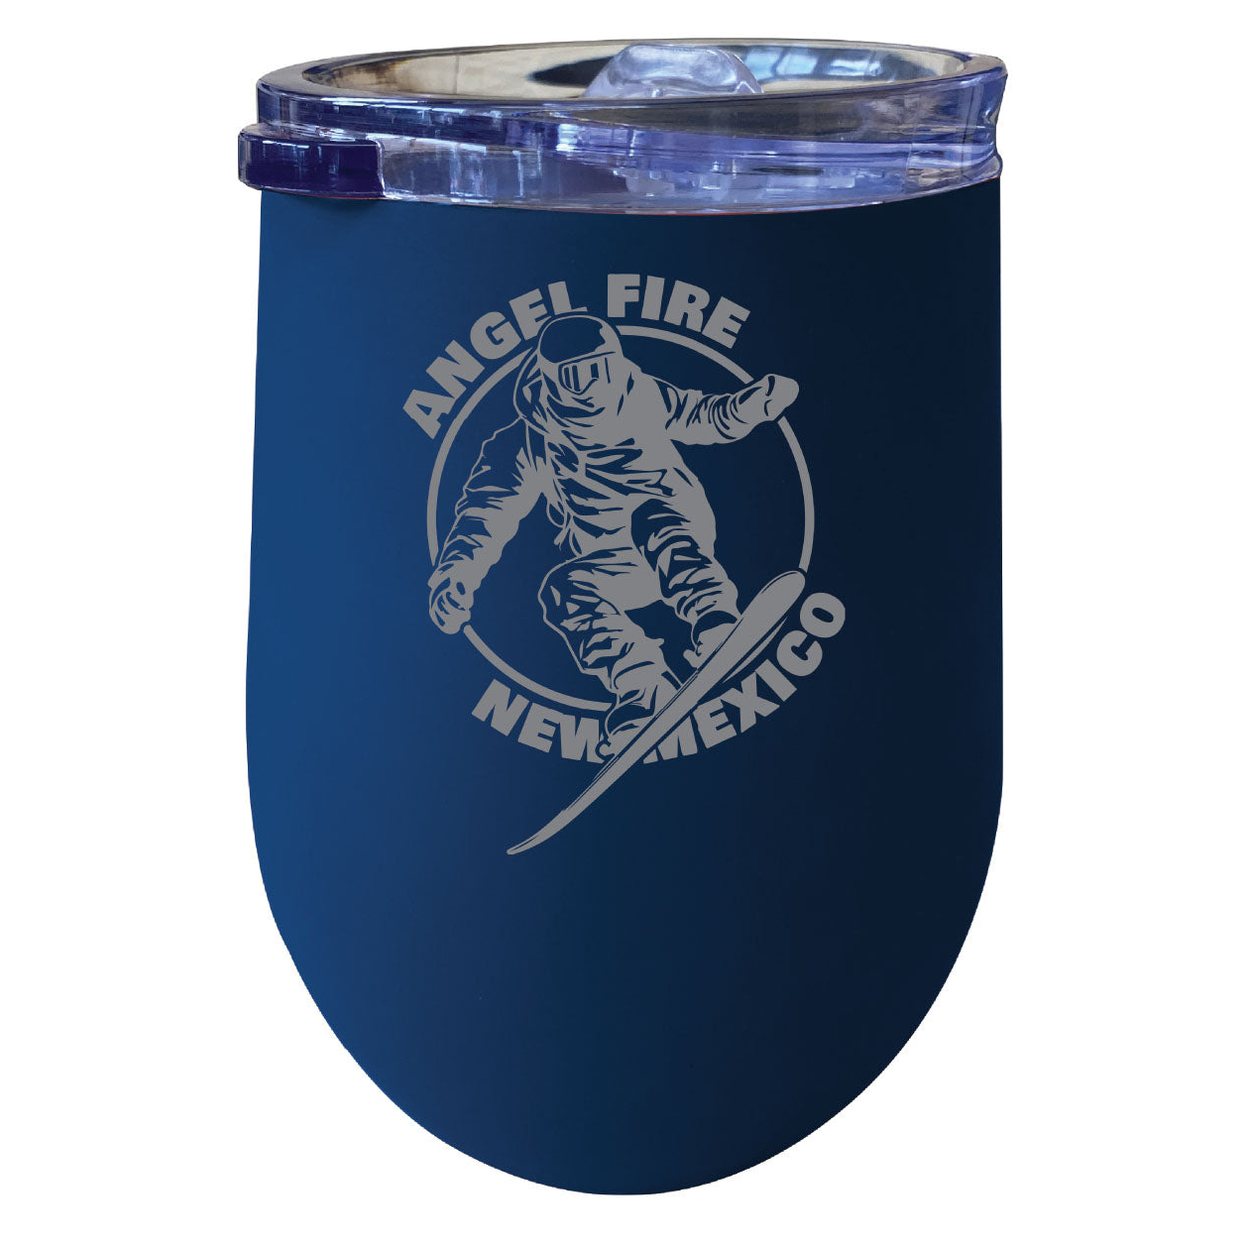 Angel Fire New Mexico Souvenir 12 Oz Engraved Insulated Wine Stainless Steel Tumbler - Navy,,Single Unit